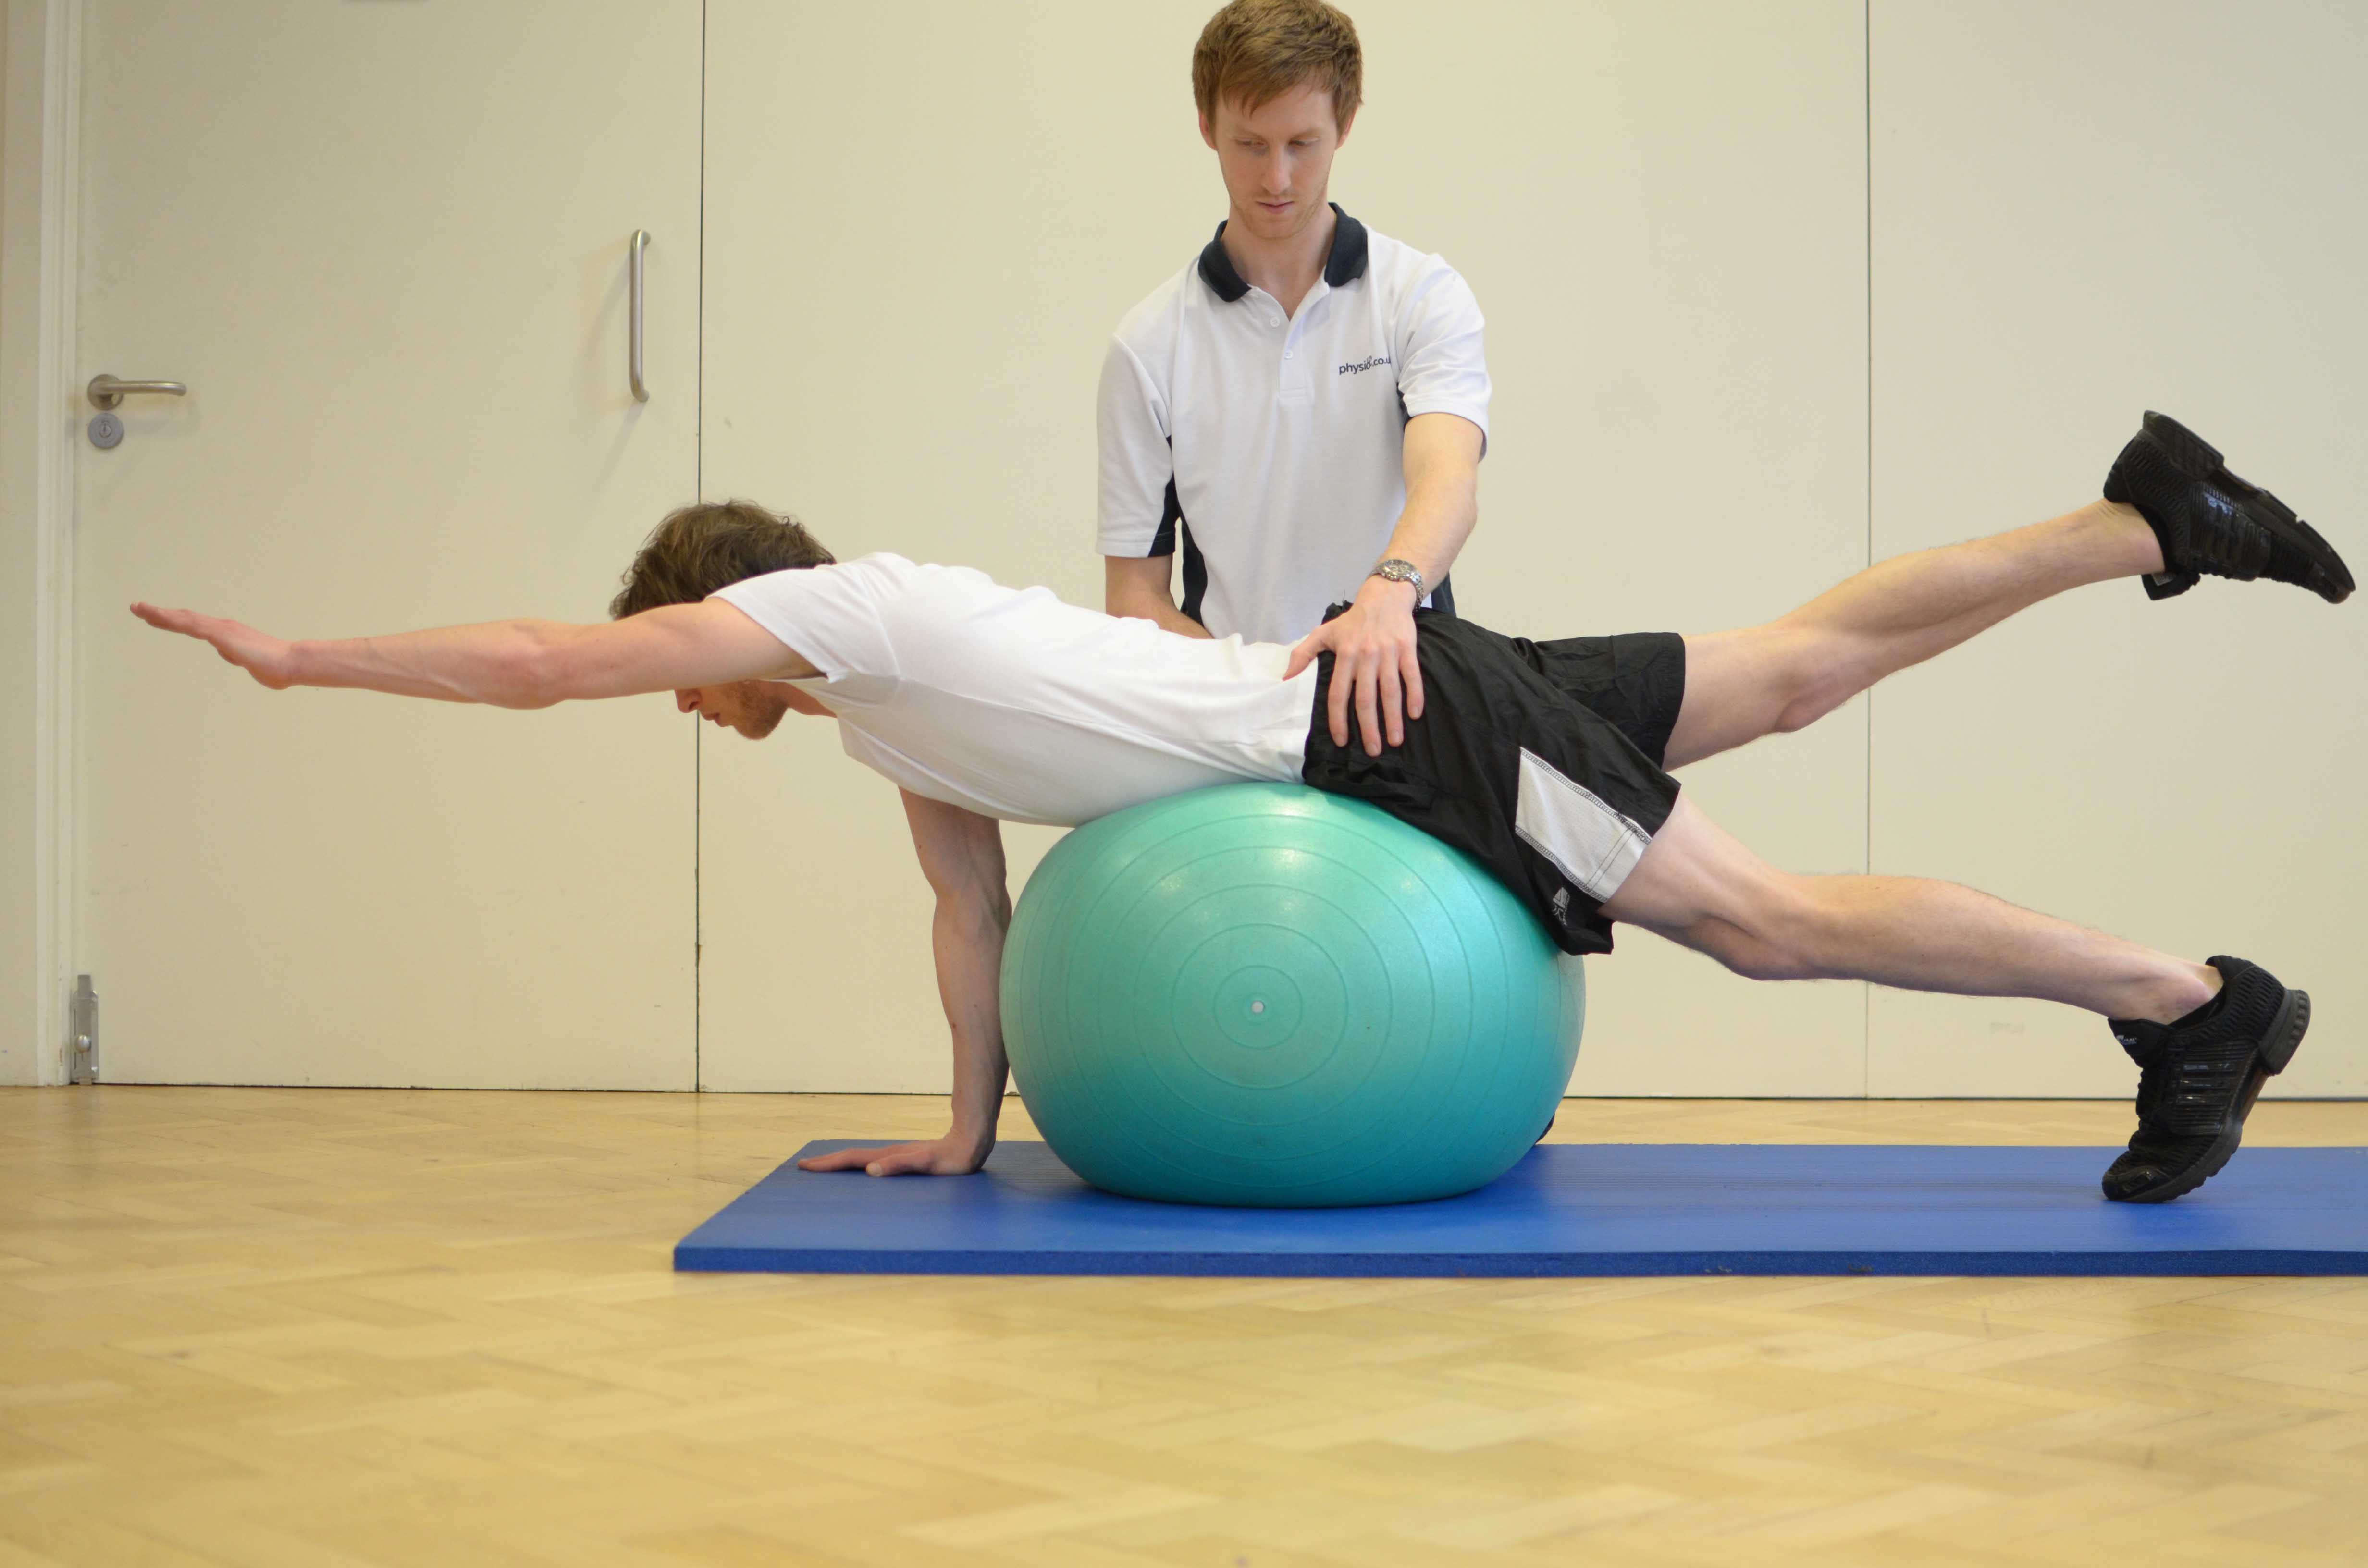 Lower back strengthening exercises supervised by Physiotherapist